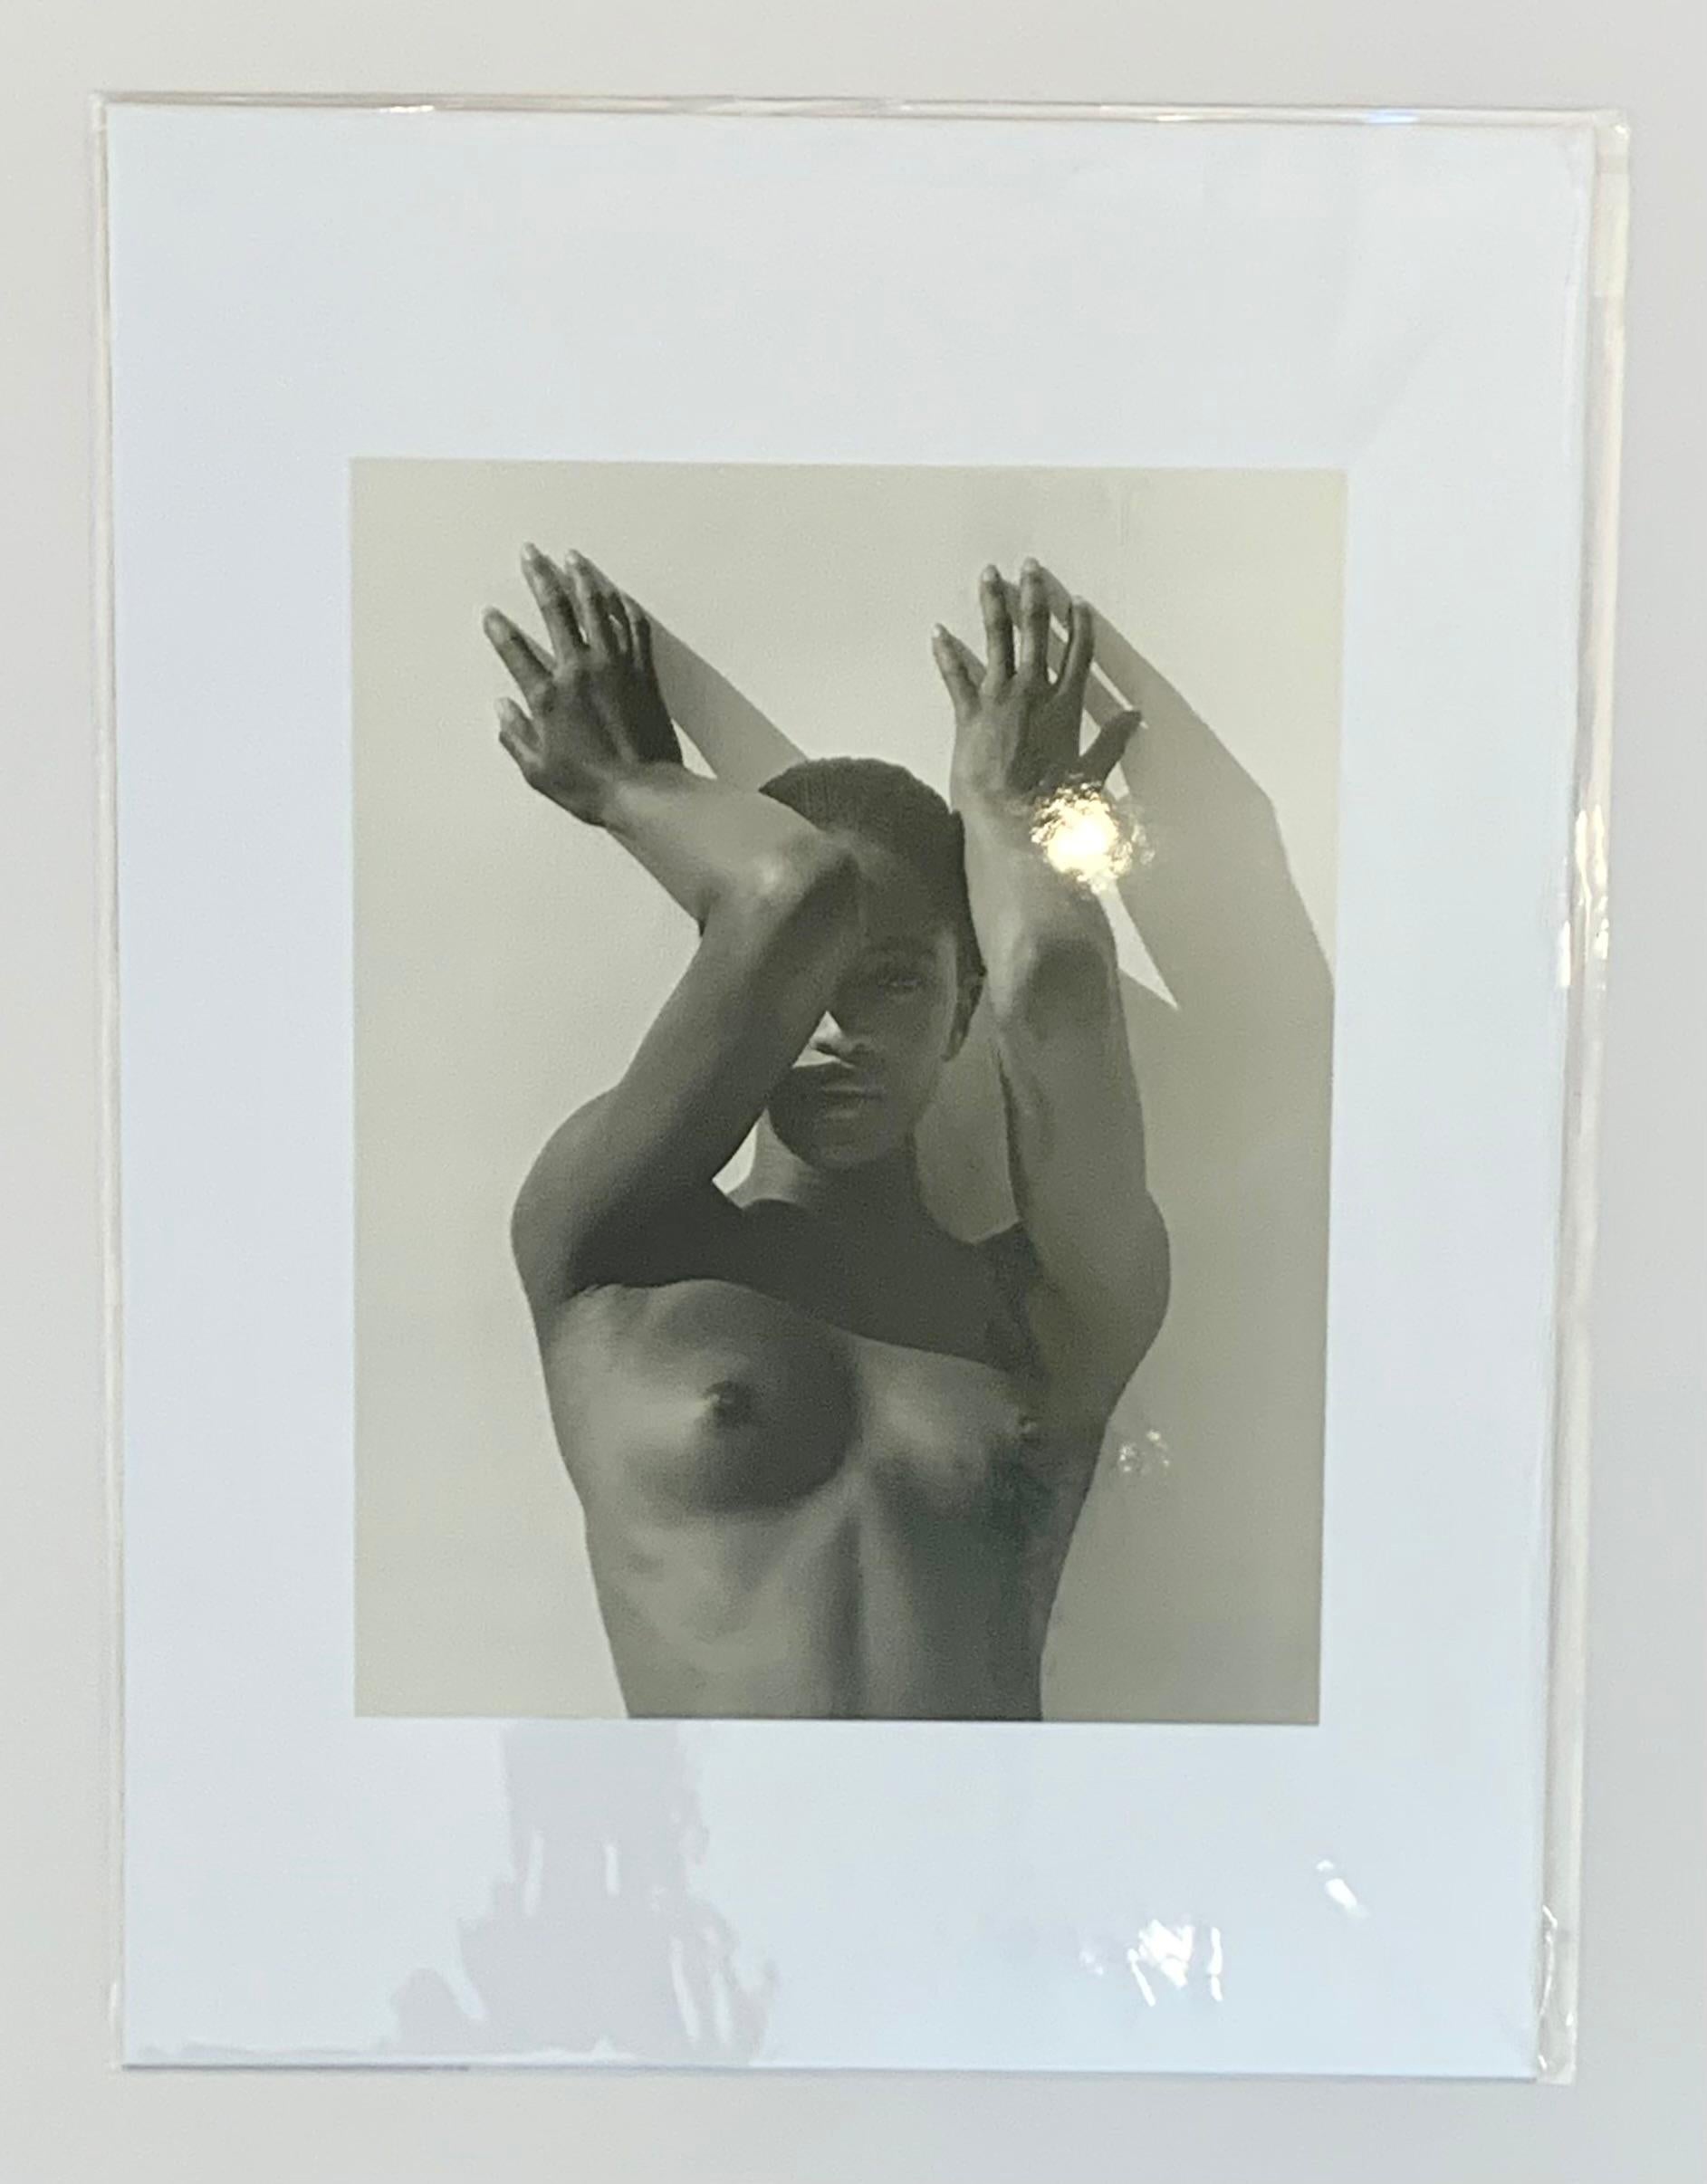 Naomi with Raised Arms Los Angeles 1988
by Herb Ritts

World renowned British super model, Naomi Campbell, posing in front of the lens with her arms raised.

Unframed
Matted
Overall size : 12 x 16